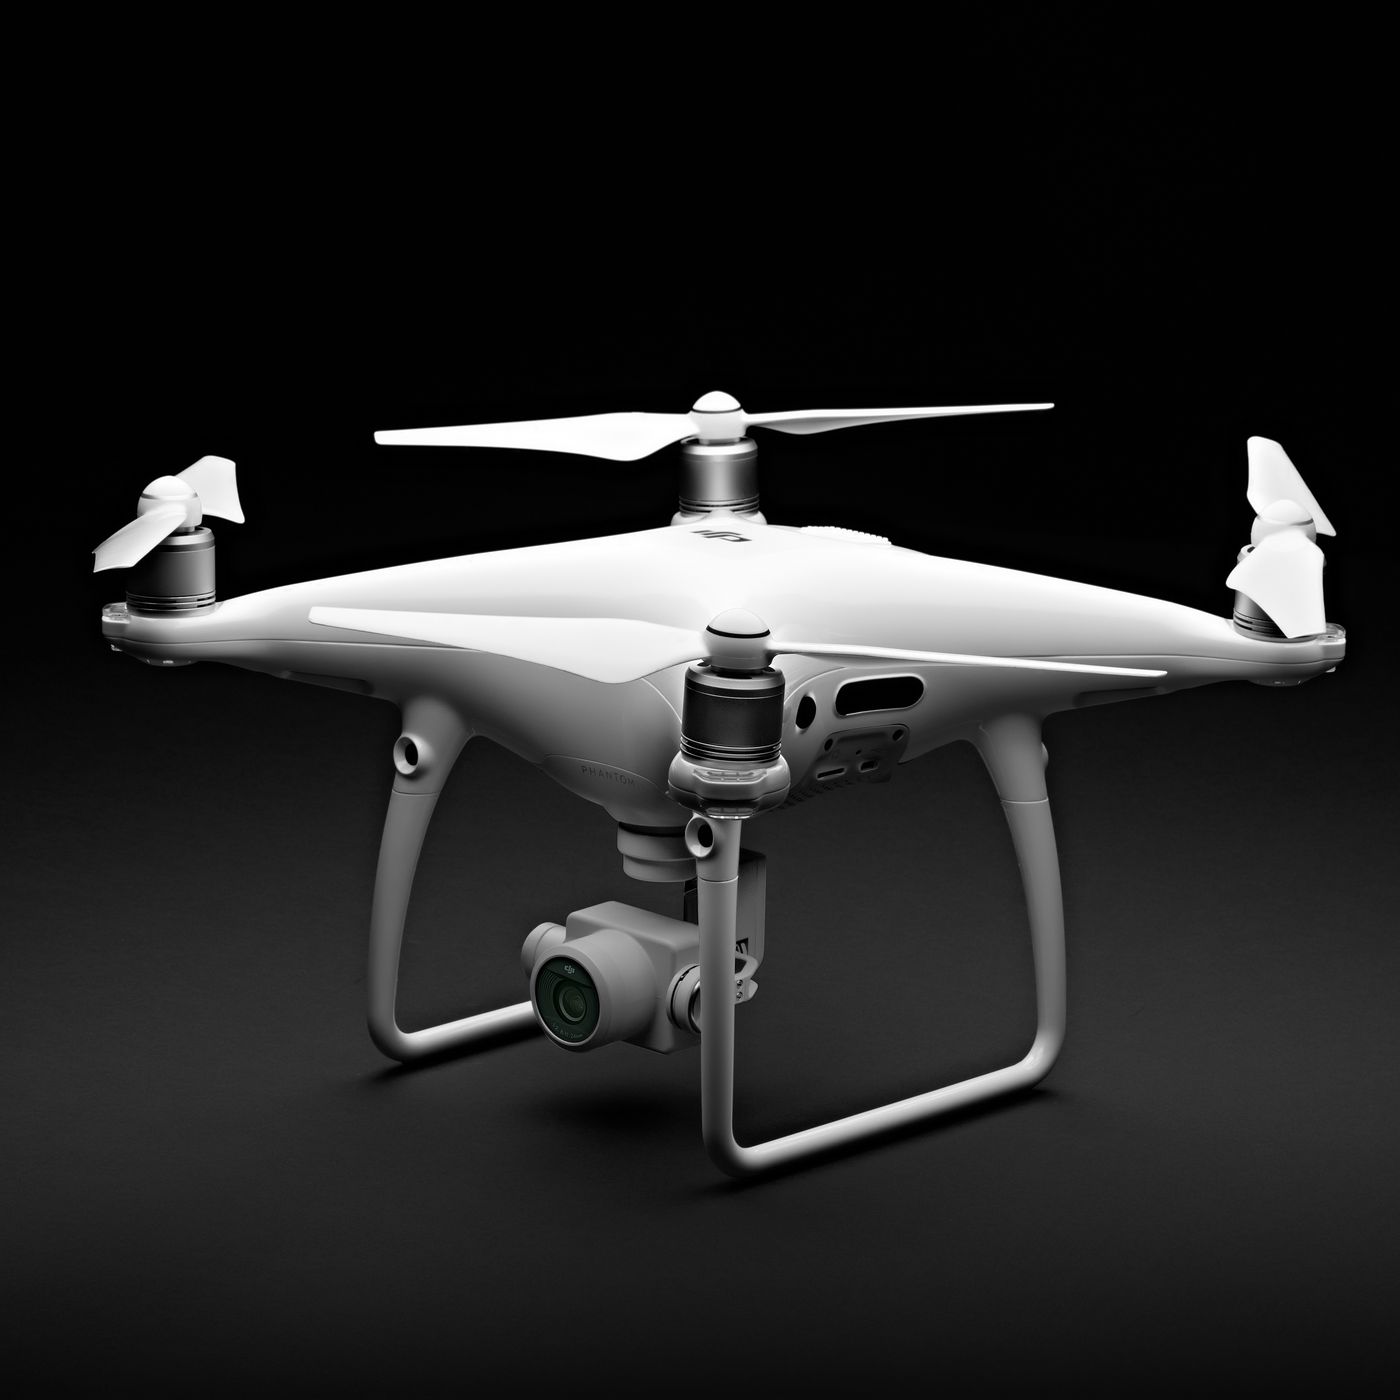 DJI Phantom 4 Pro complete aerial imaging mapping photography videography solution designed for the professional content creators.